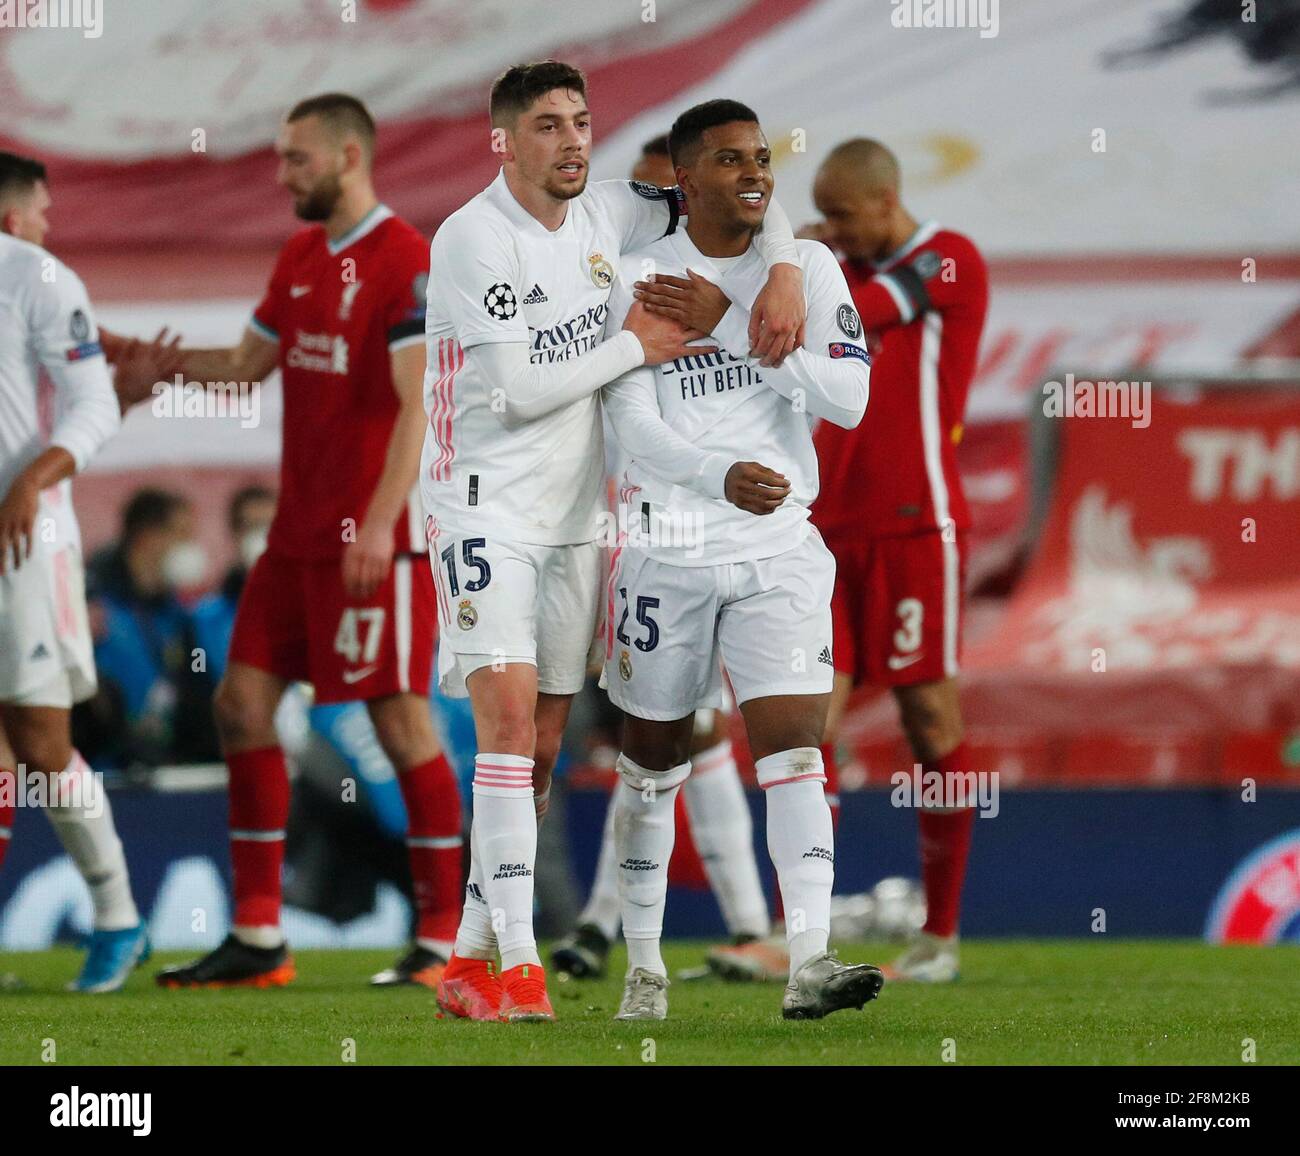 Liverpool, England, 14th April 2021. Federico Valverde and Rodrygo of Real Madrid celebrate the win during the UEFA Champions League match at Anfield, Liverpool. Picture credit should read: Darren Staples / Sportimage Stock Photo